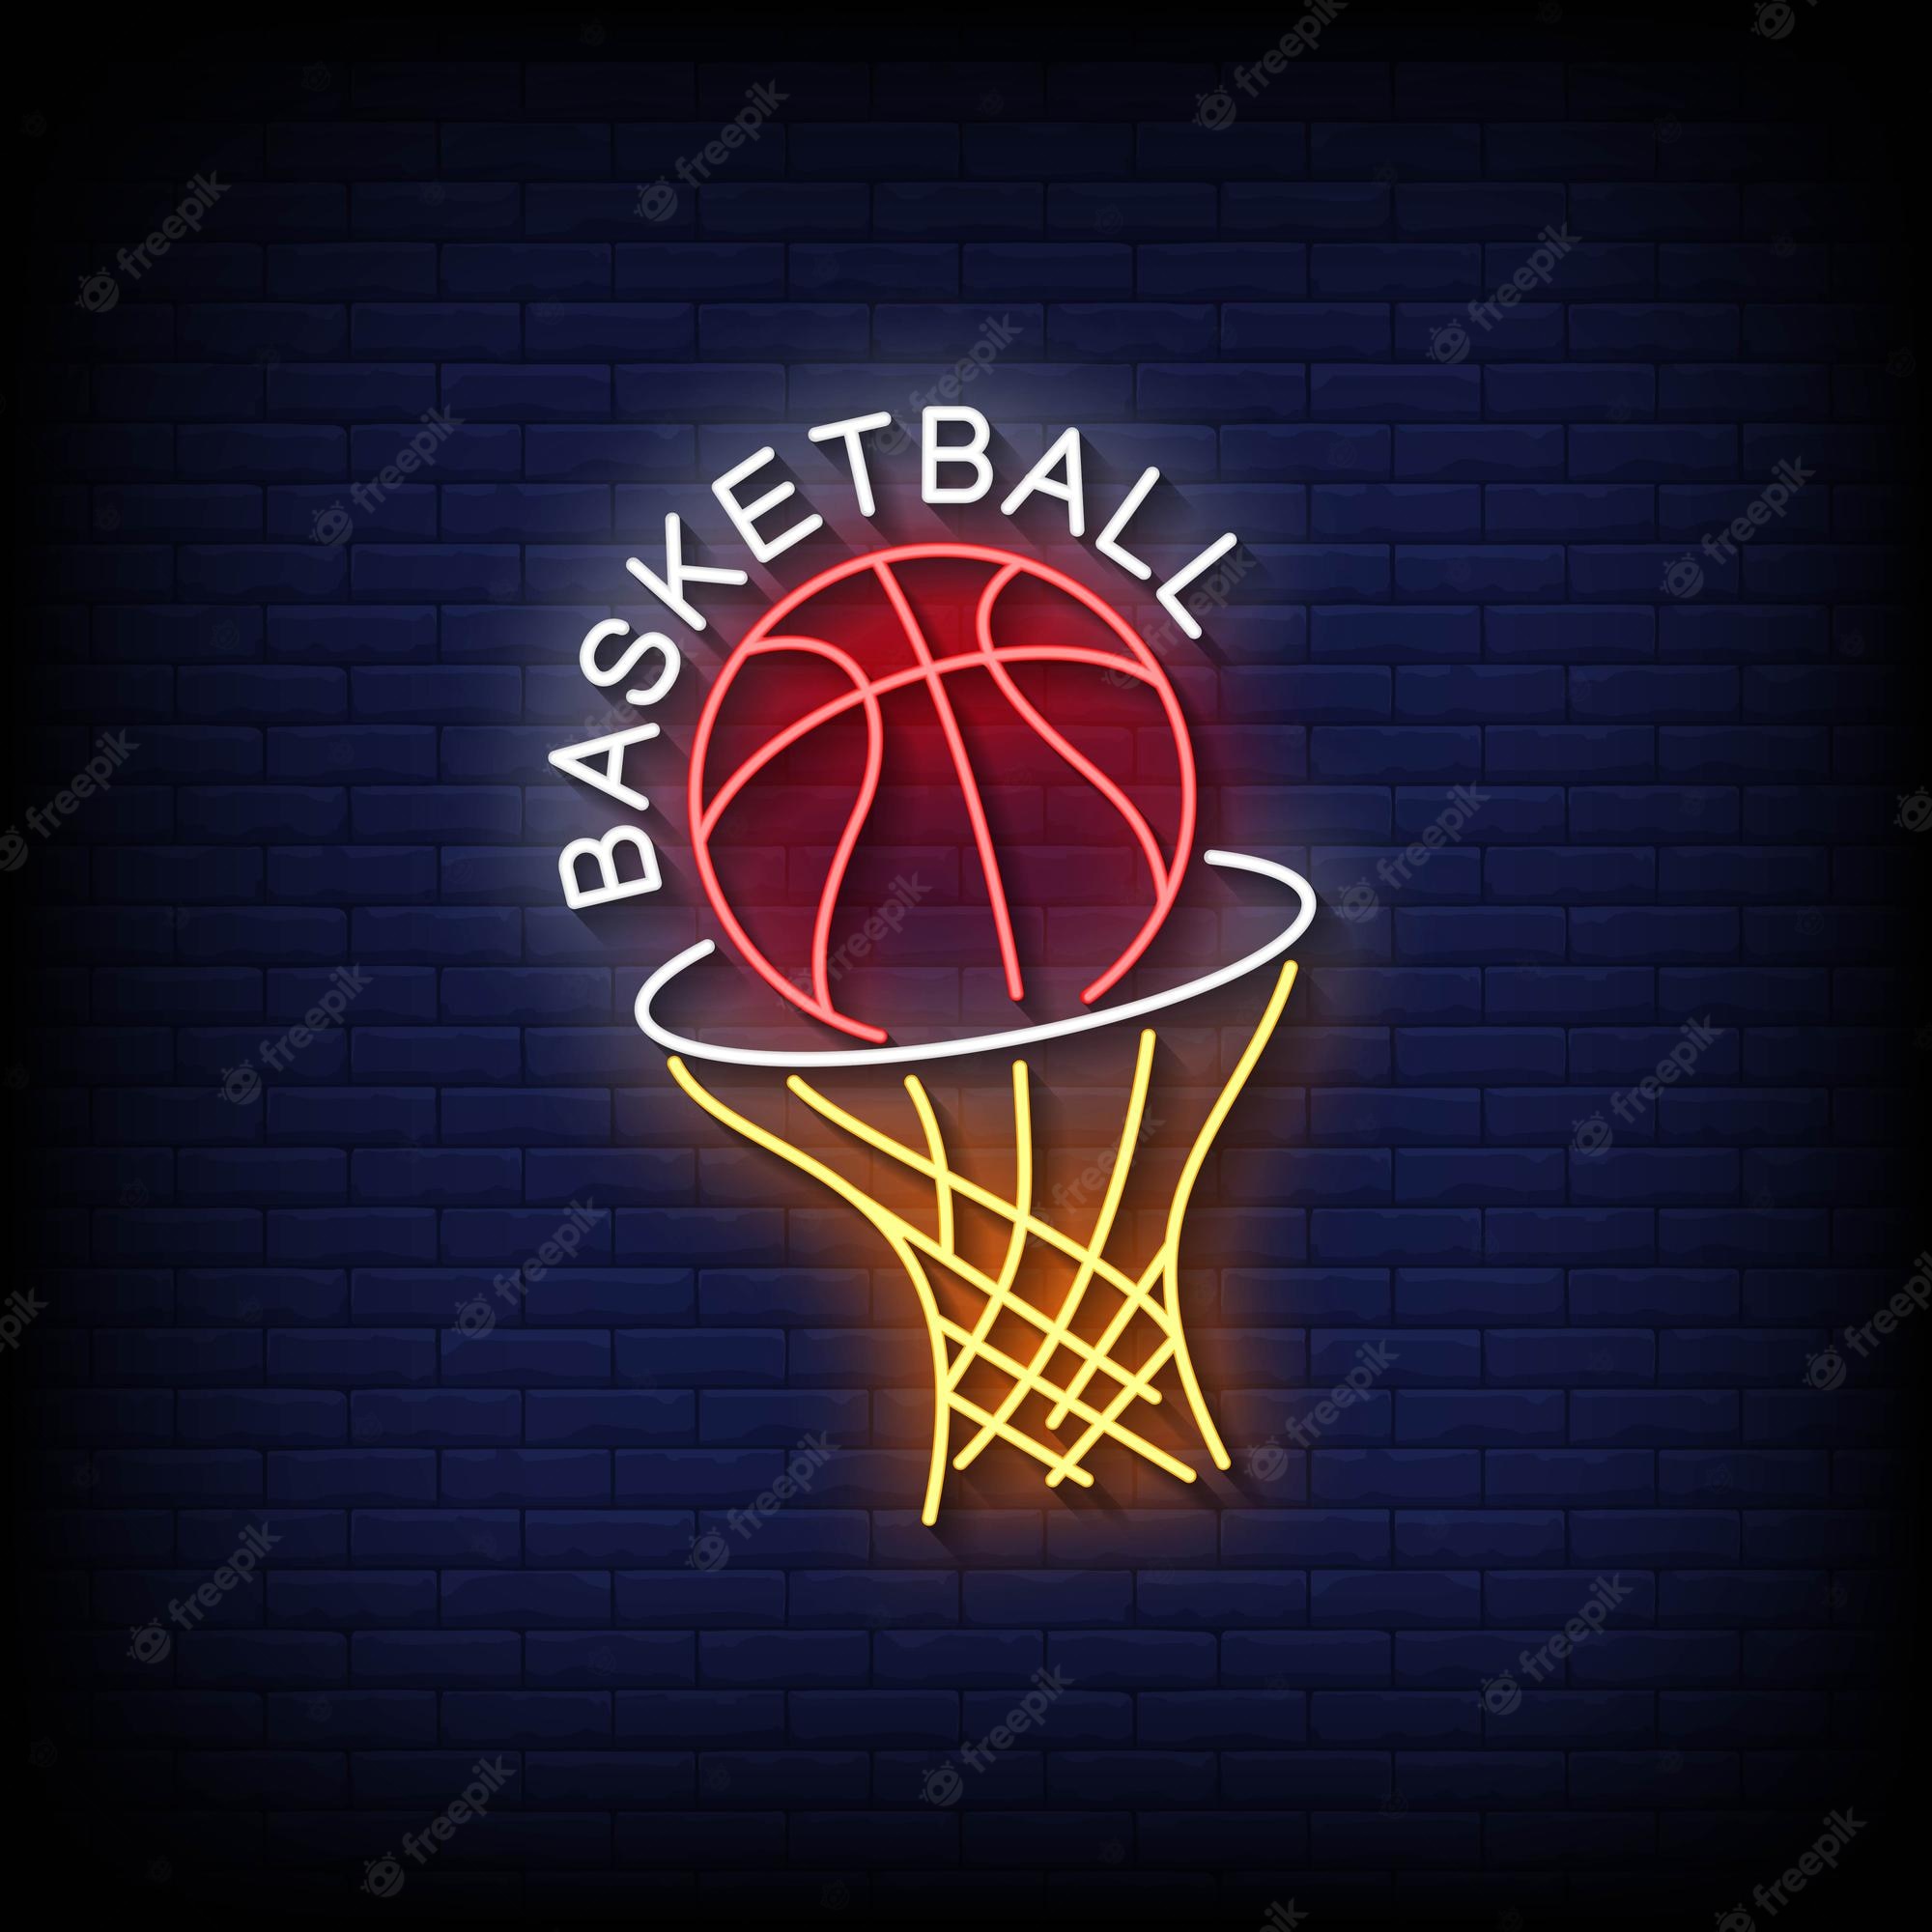 Neon basketball Vectors & Illustrations for Free Download